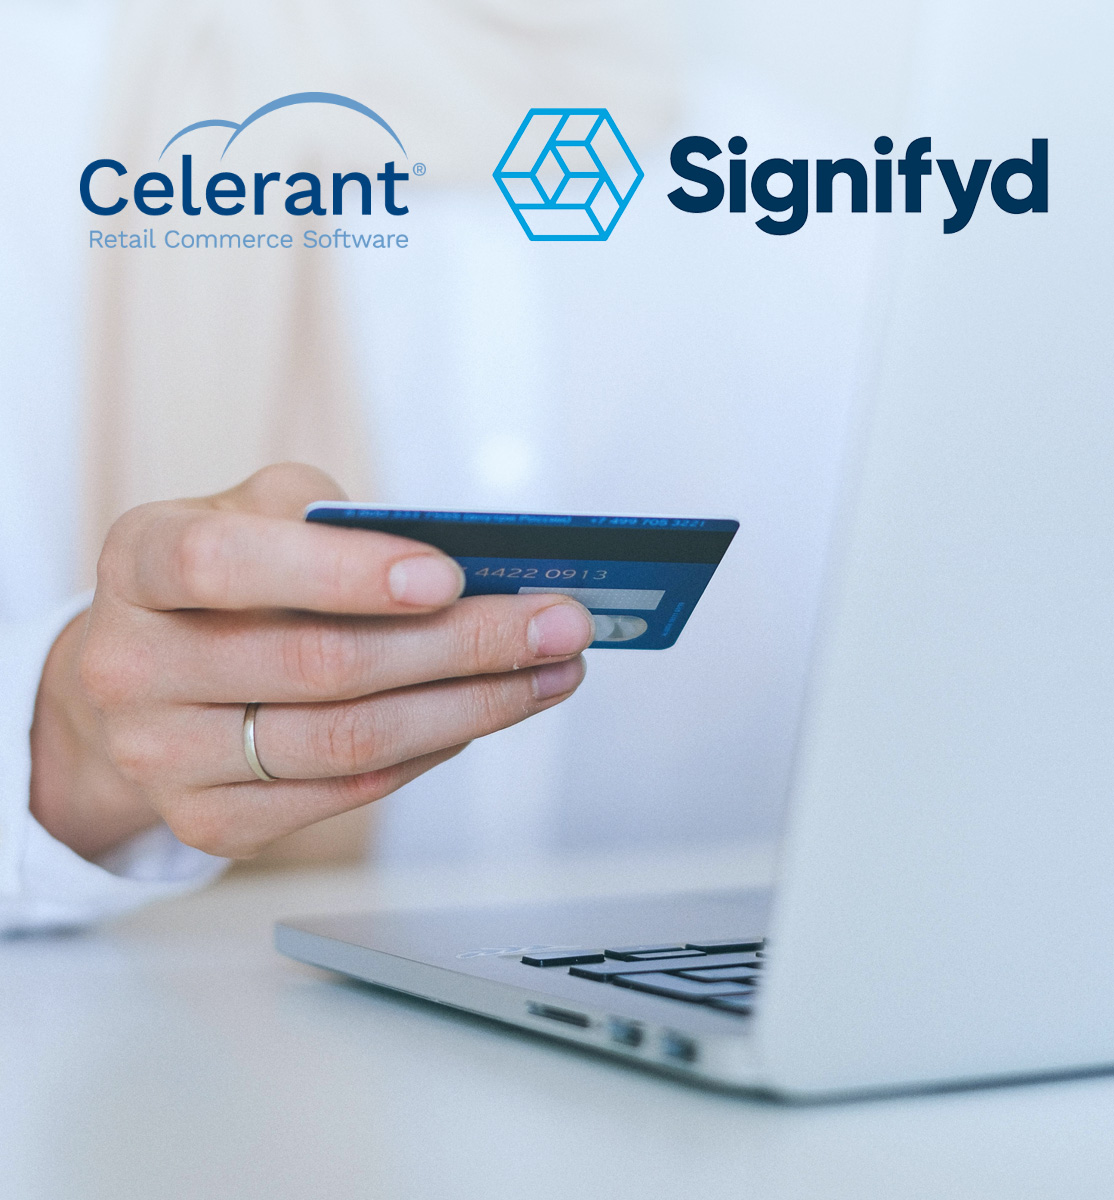 Signifyd and Celerant